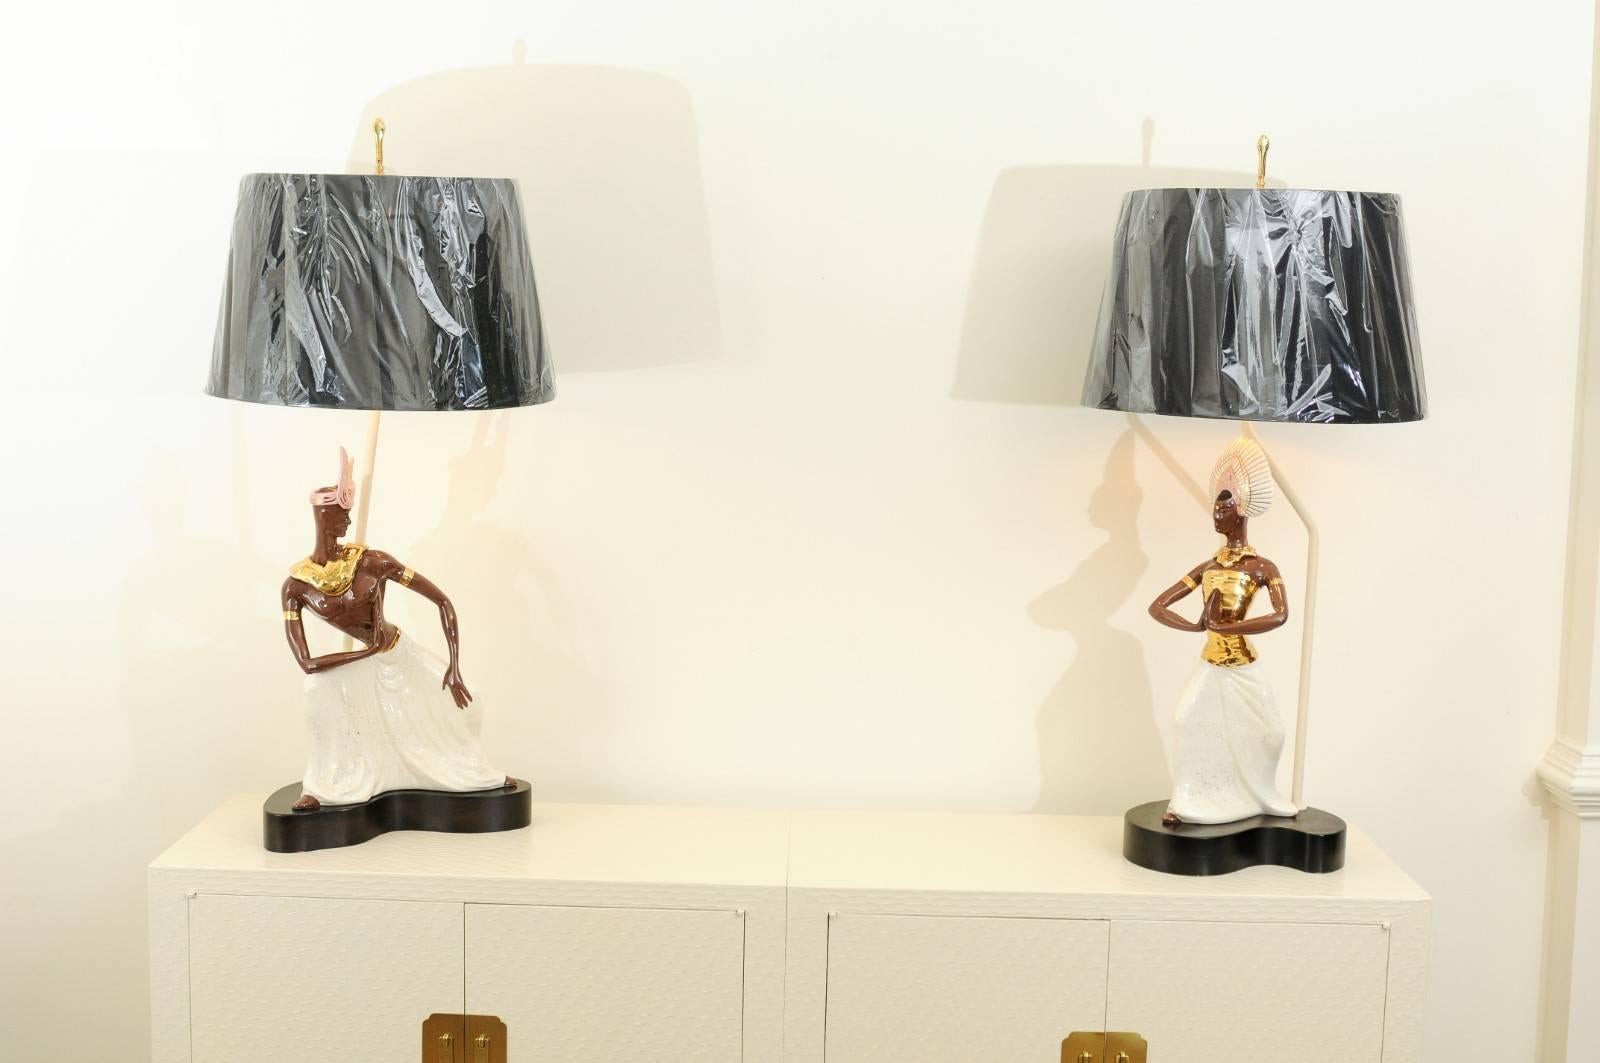 Breathtaking Restored Pair of Exotic Marc Bellaire Lamps, circa 1958 For Sale 5